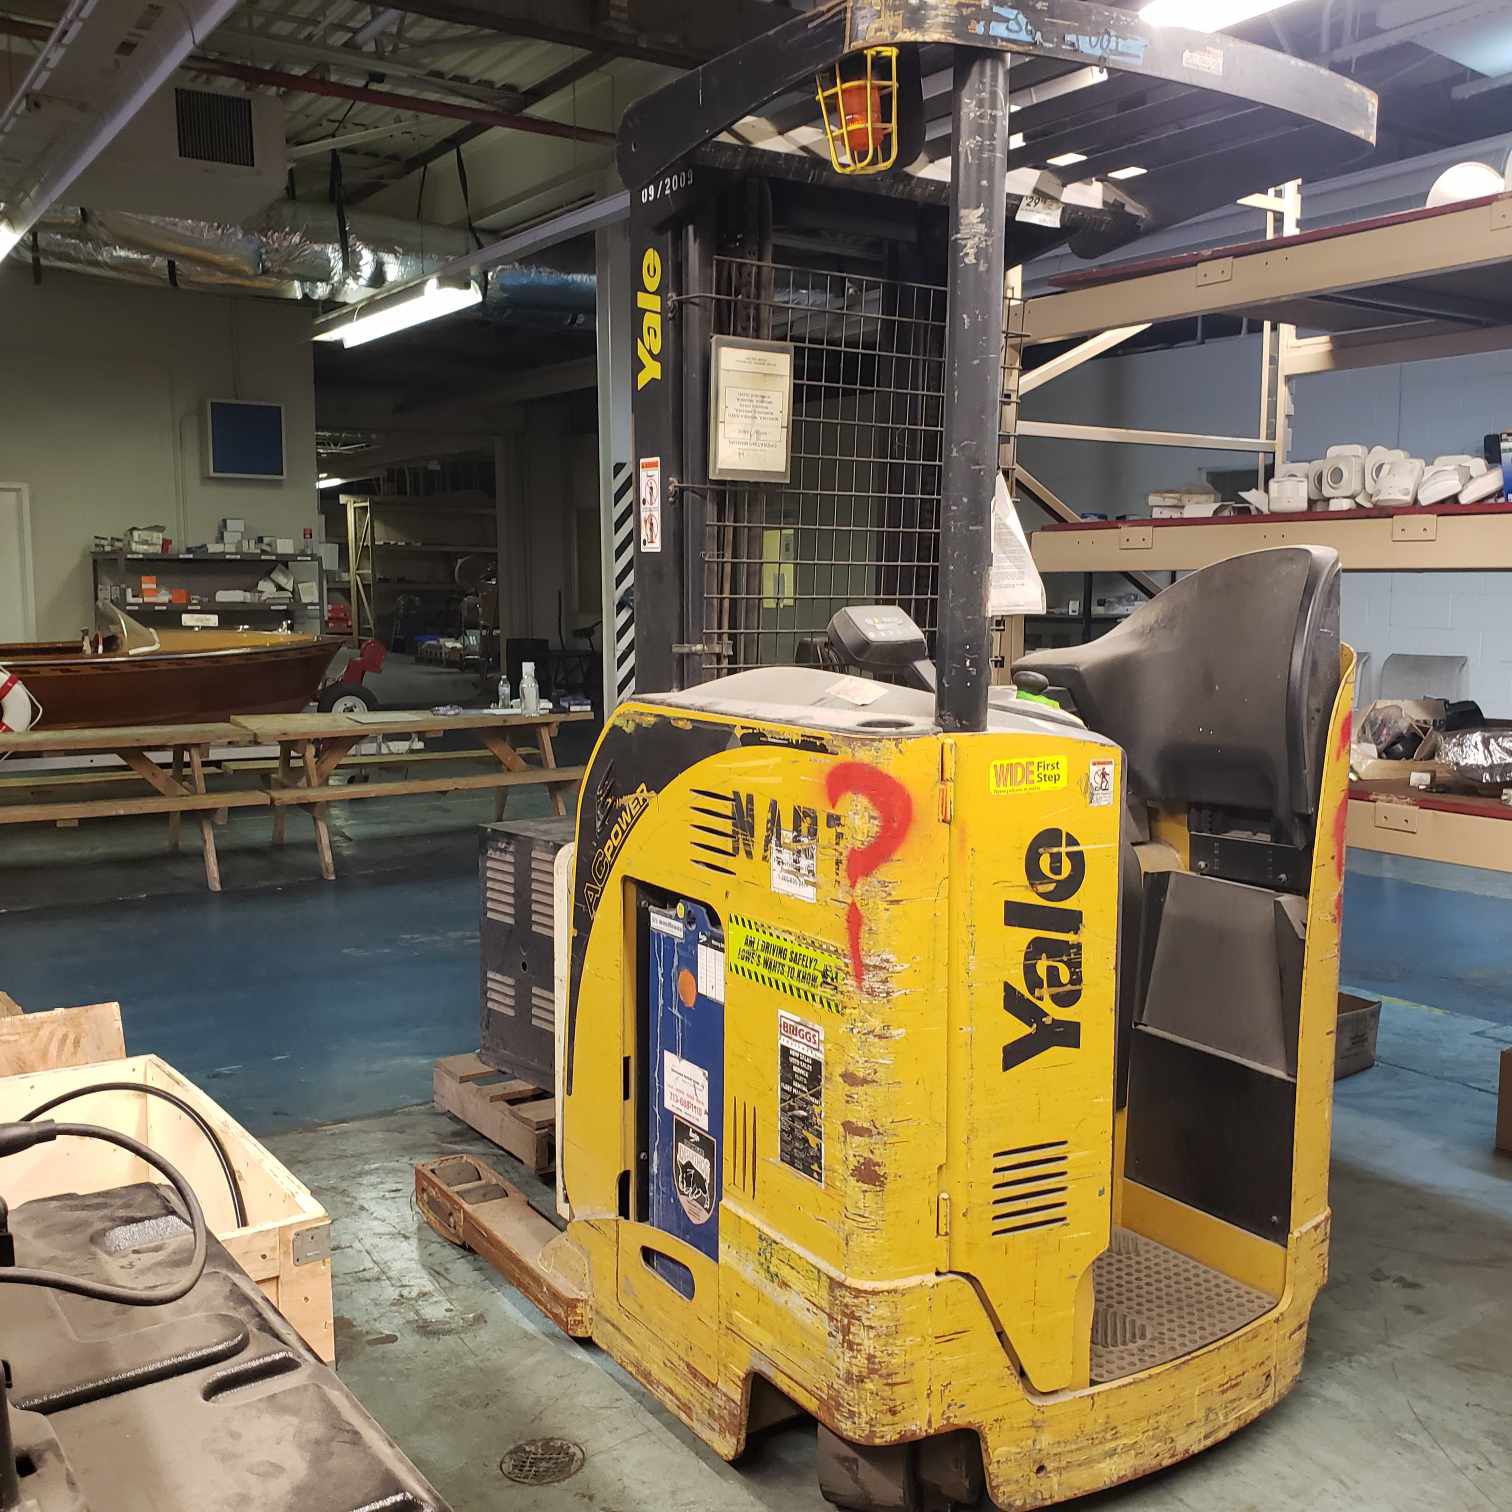 Yale NR040 Electric Reach Forklift 4K # 3S SS w/Charger $6,000 obo